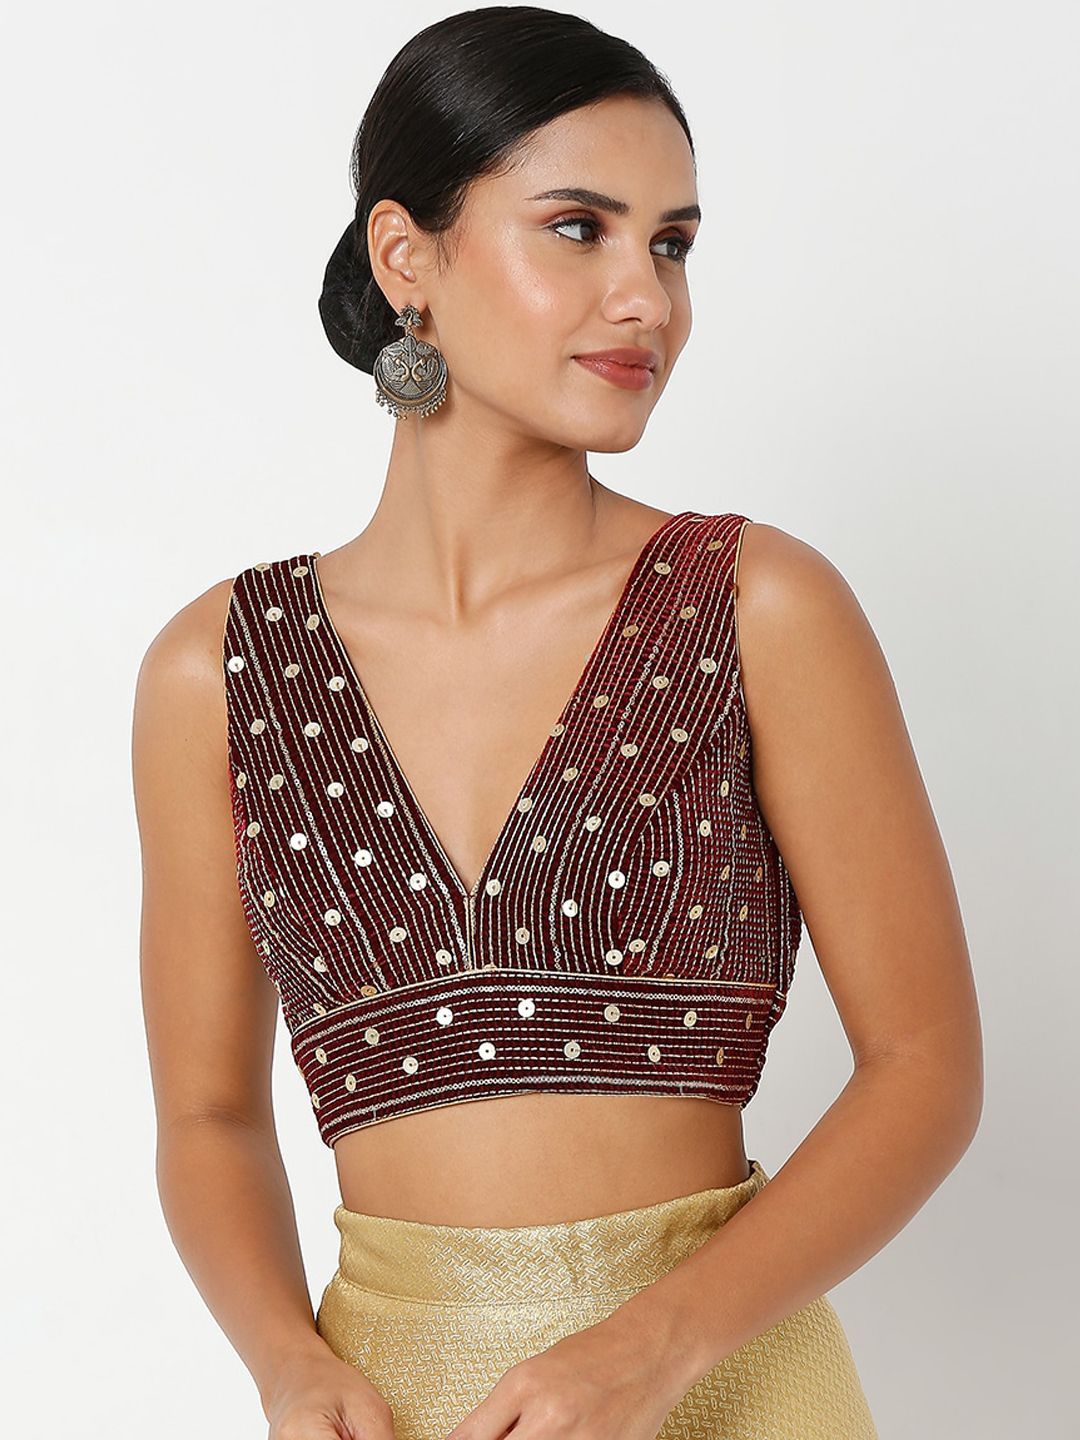 SALWAR STUDIO Maroon & Gold-Colored Embroidered Readymade Saree Blouse Price in India